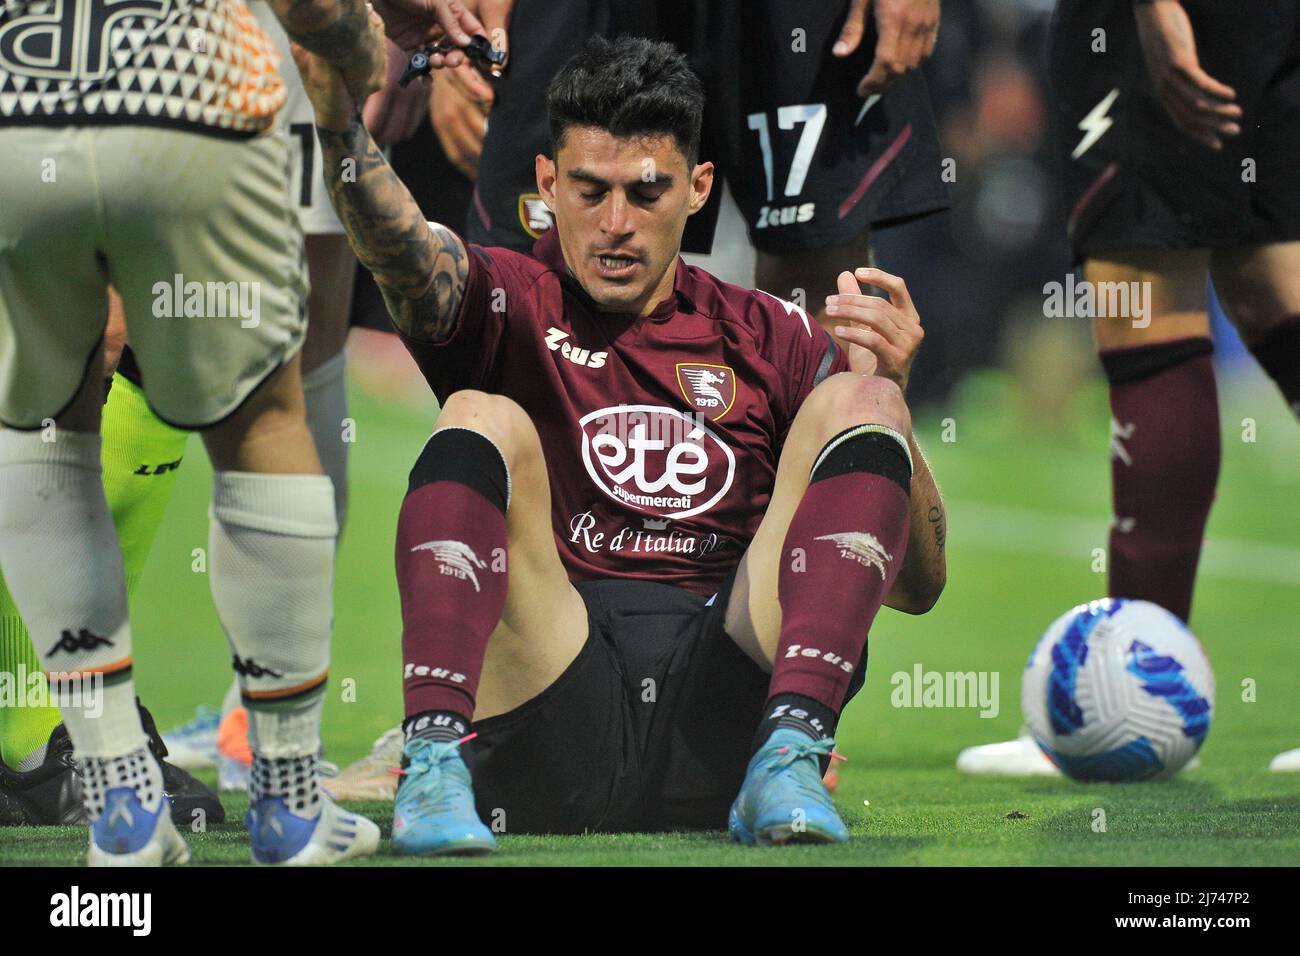 Diego Perotti player of Salernitana, during the match of the Italian Serie A league between Salernitana vs Venezia final result, Salernitana 2, Venezi Stock Photo